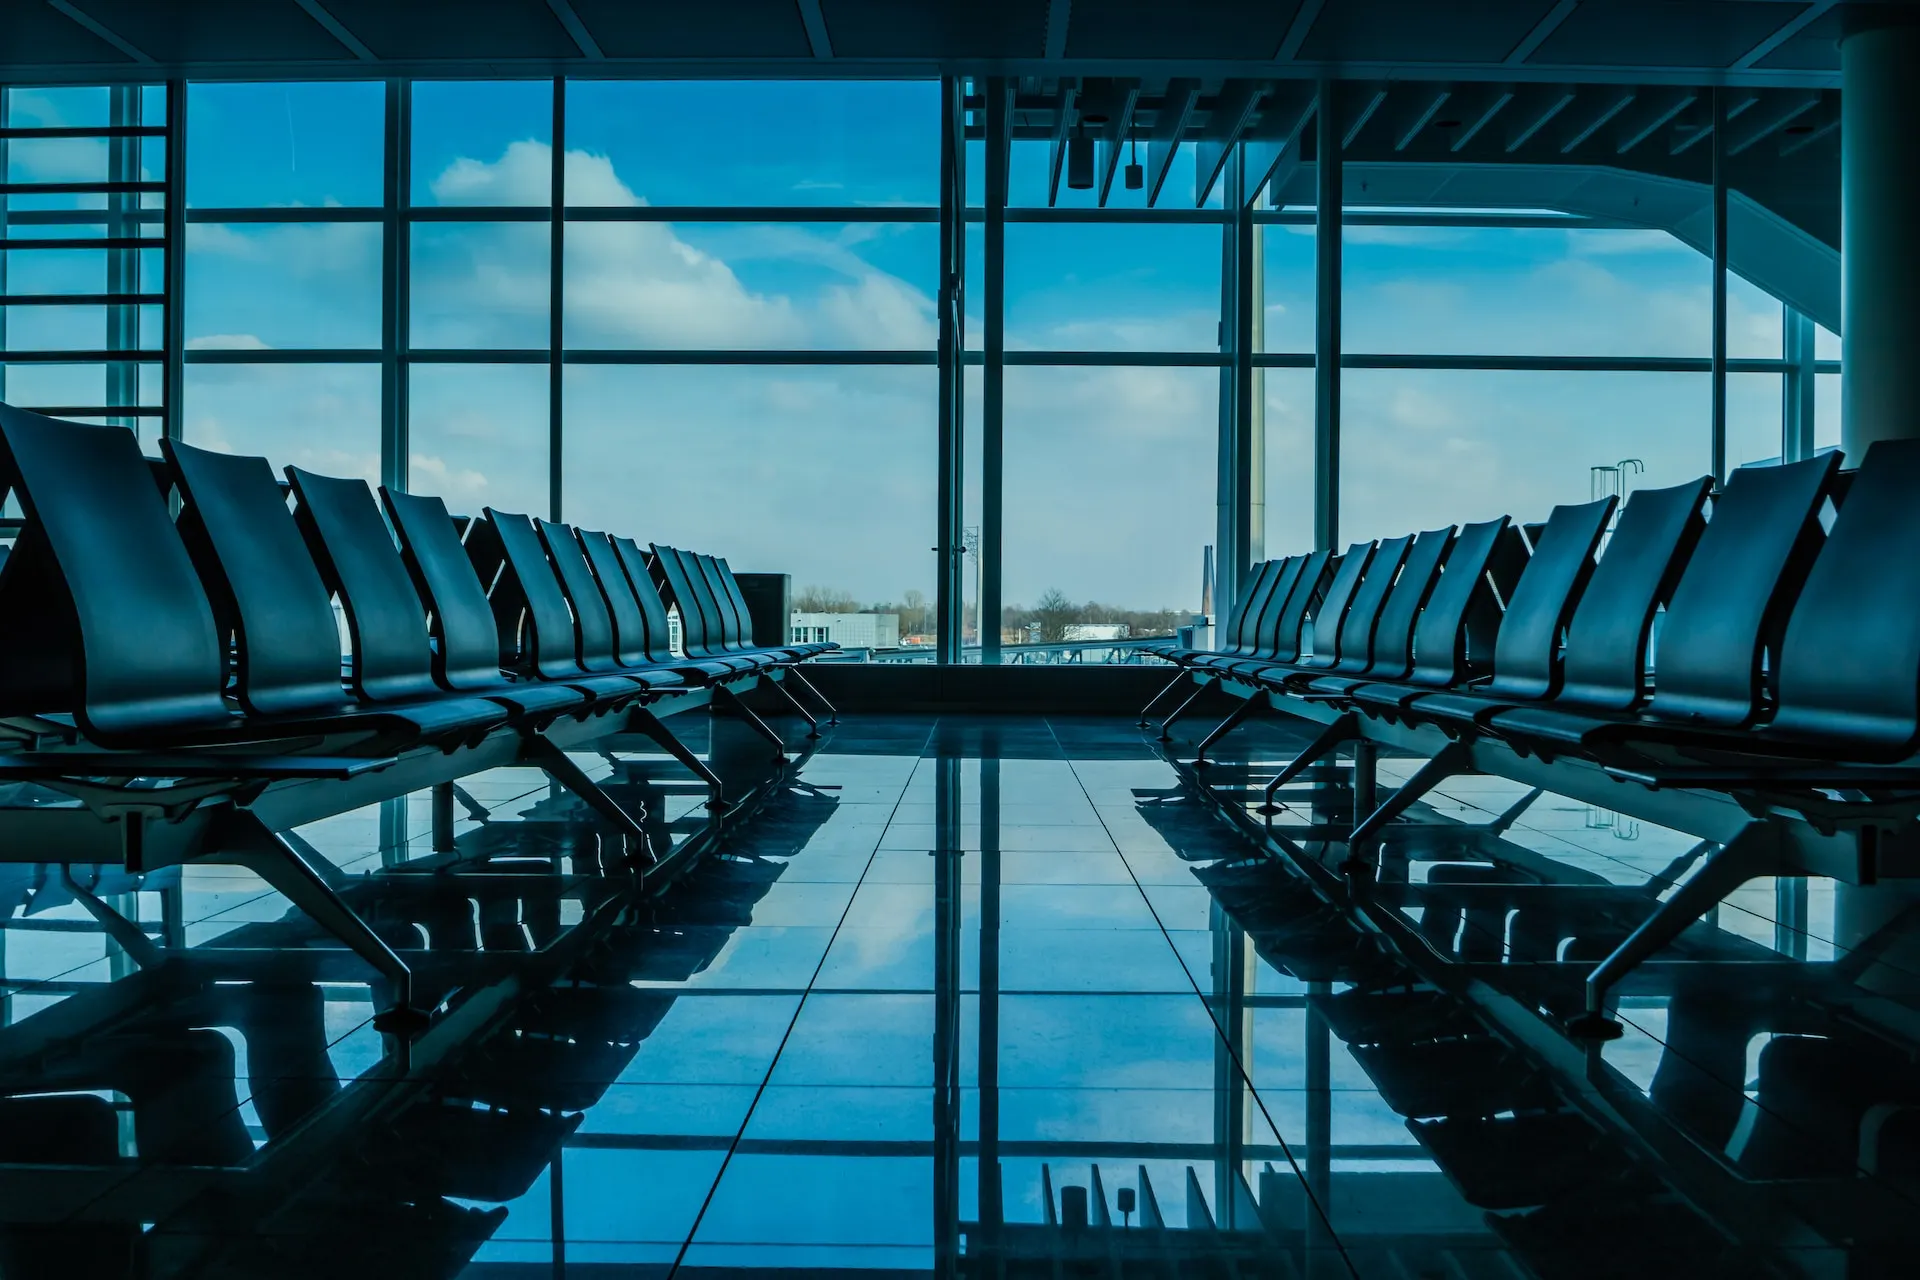 Airport terminal. Source: Photo by Paul Mocan on Unsplash